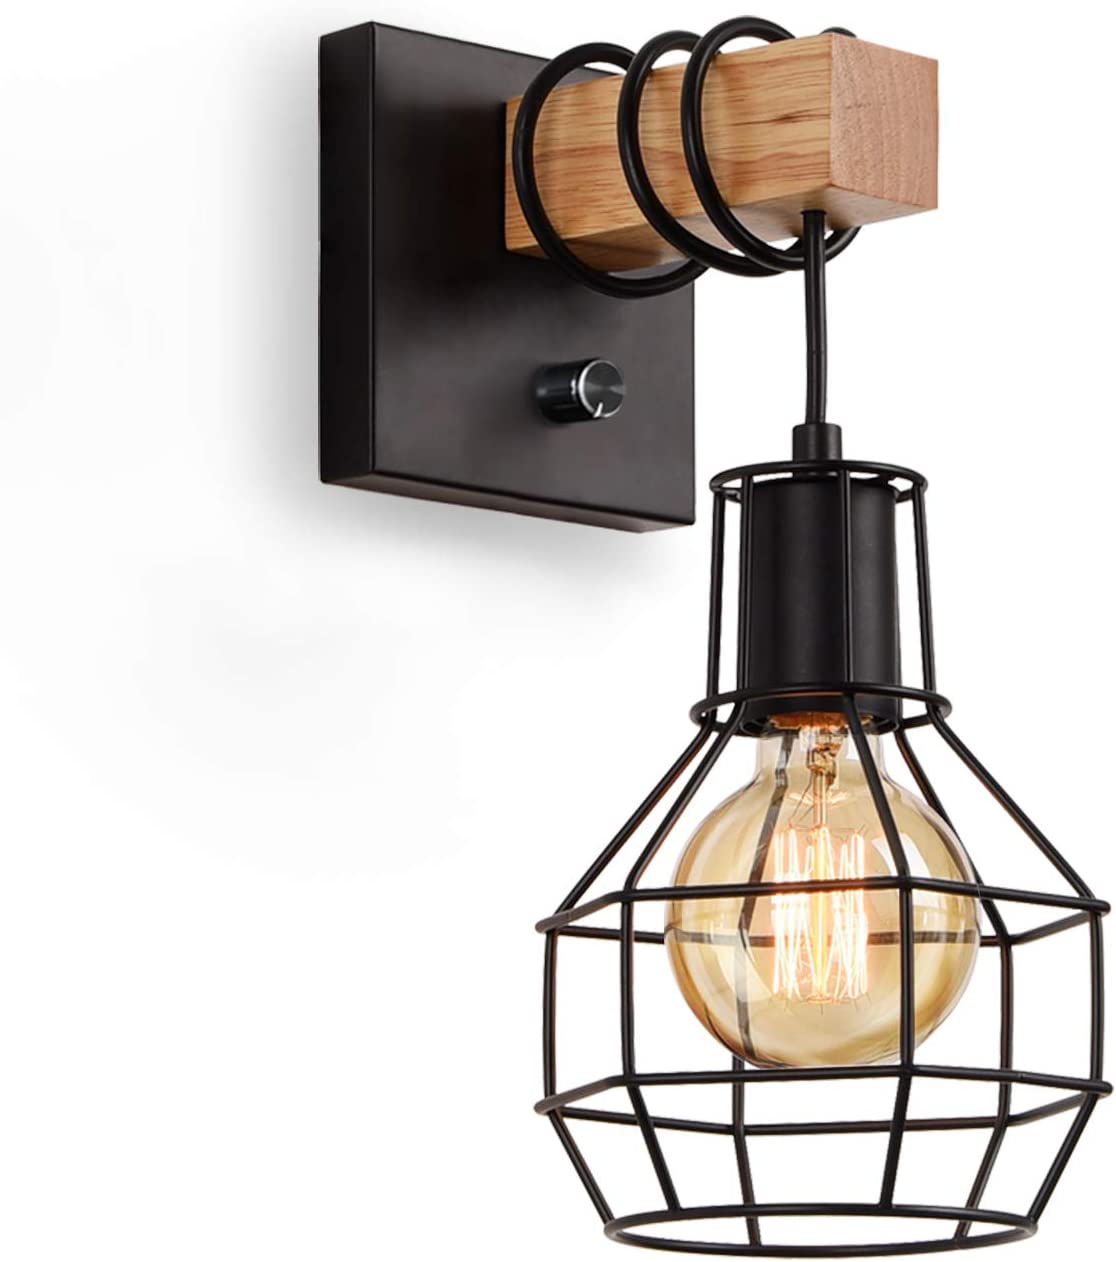 Lightess Black Wall Sconces with Dimmer ON/Off Switch, Vintage Cage Wall Mount Light Fixture Industrial Farmhouse Lighting for Living Room Kitchen, C71Y215